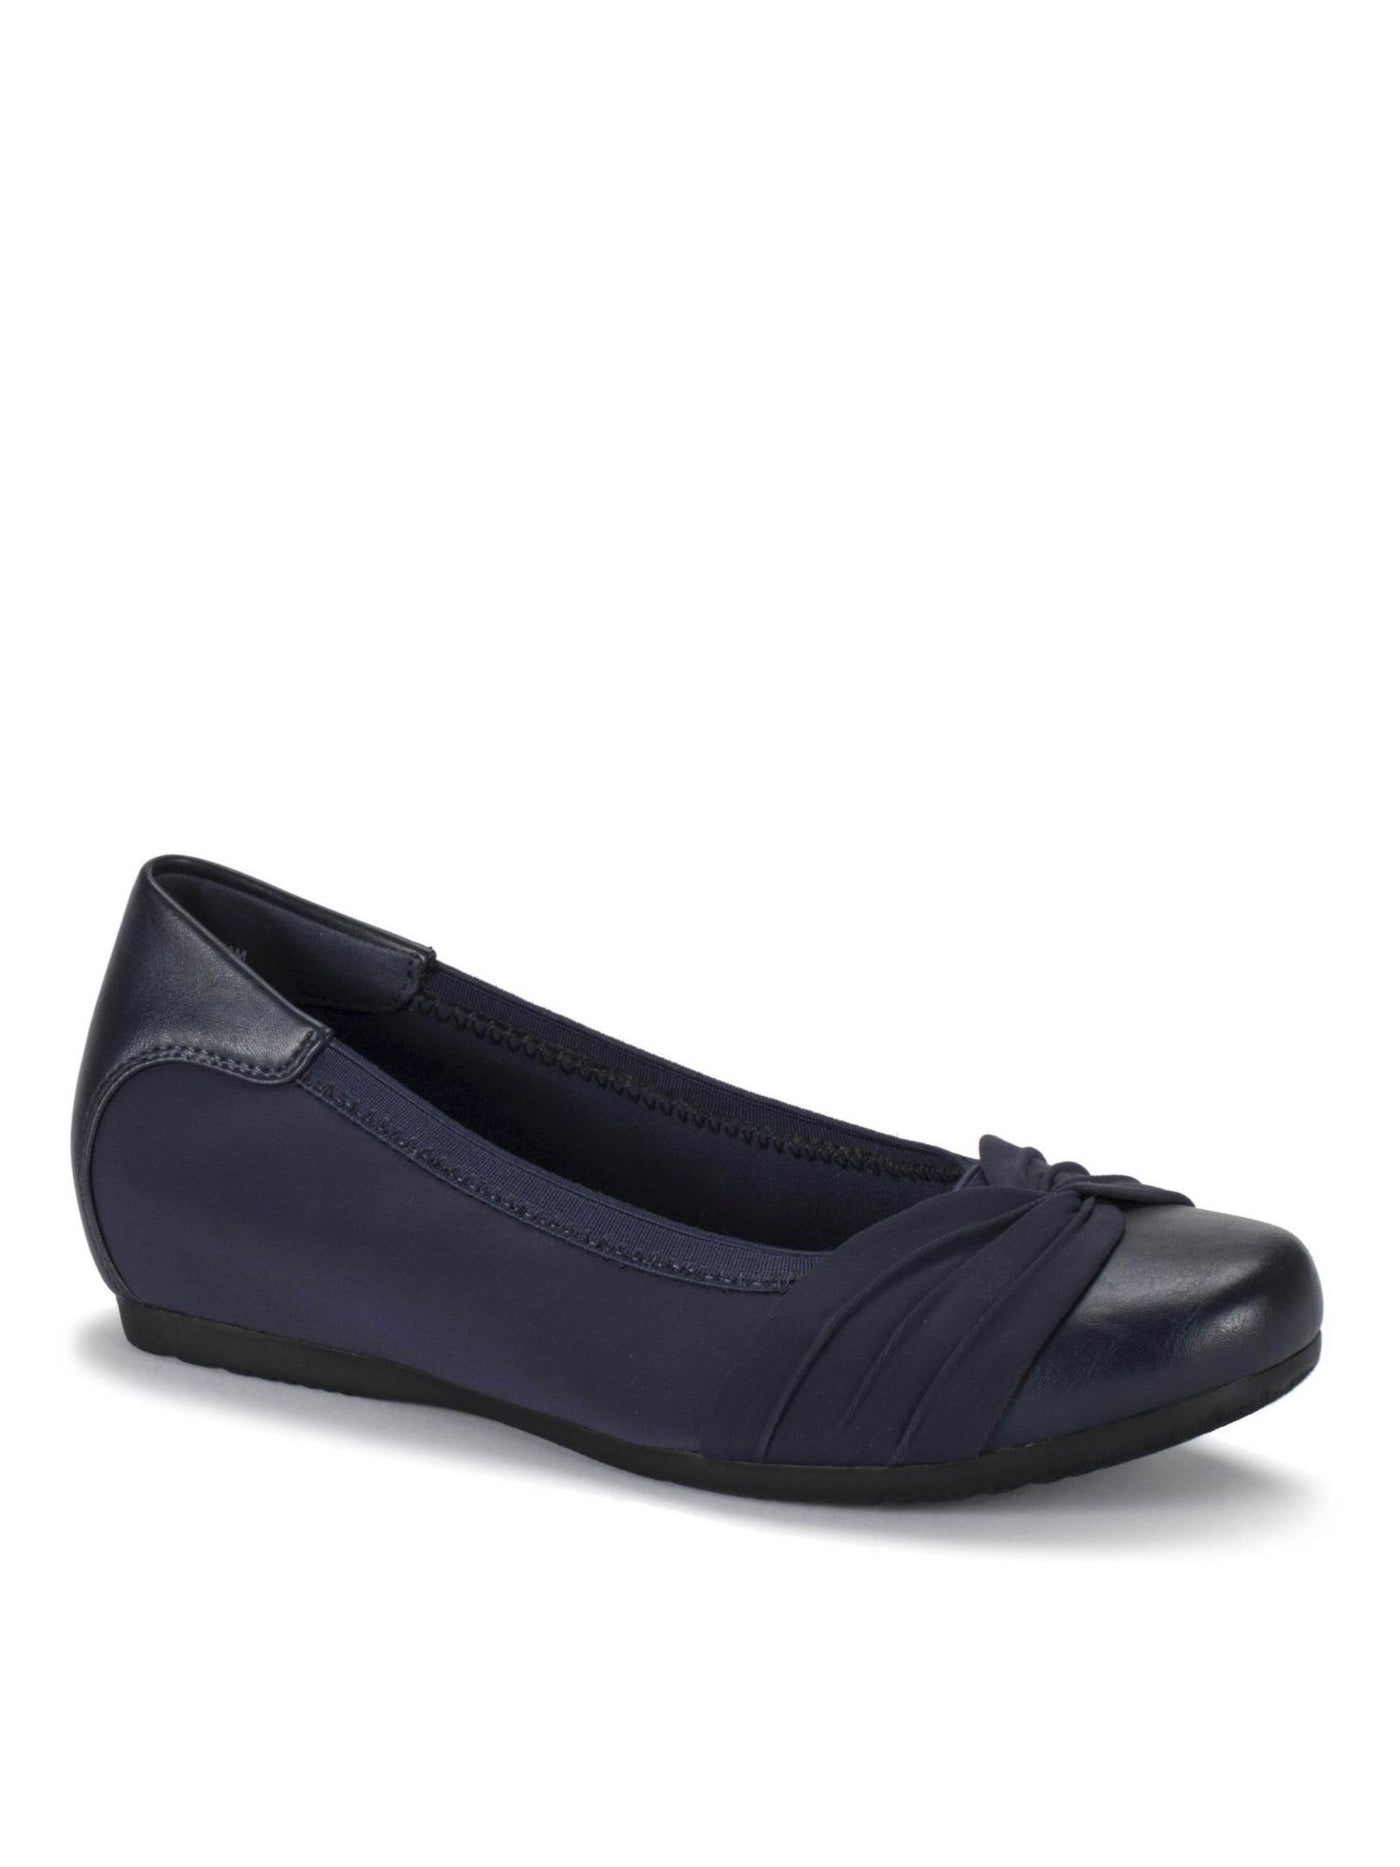 BARETRAPS Womens Navy Cushioned Marcie Round Toe Slip On Flats Shoes 6.5 M